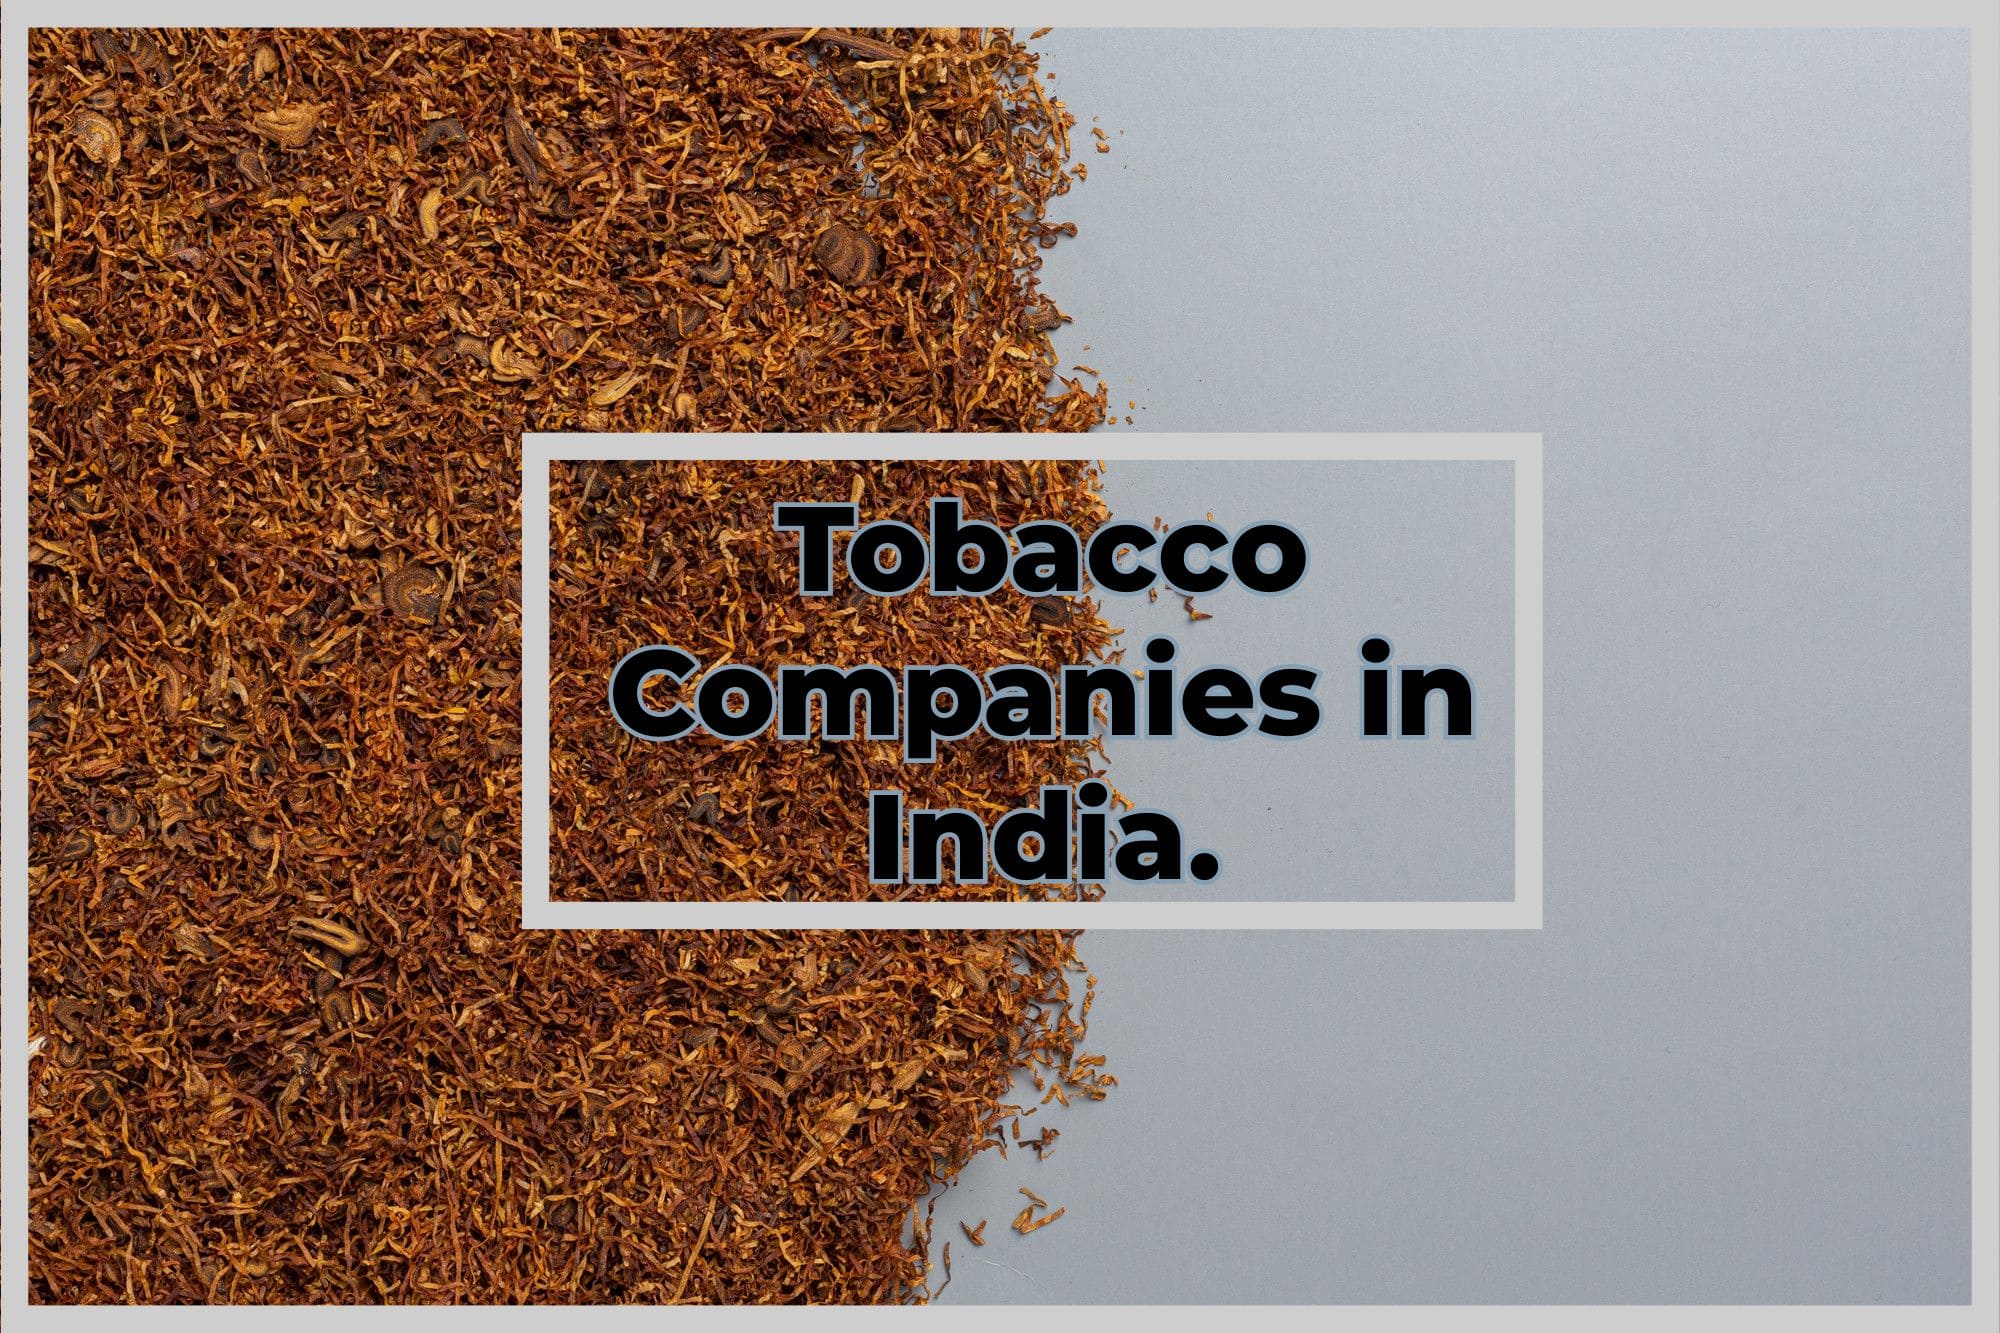 Tobacco Companies in India